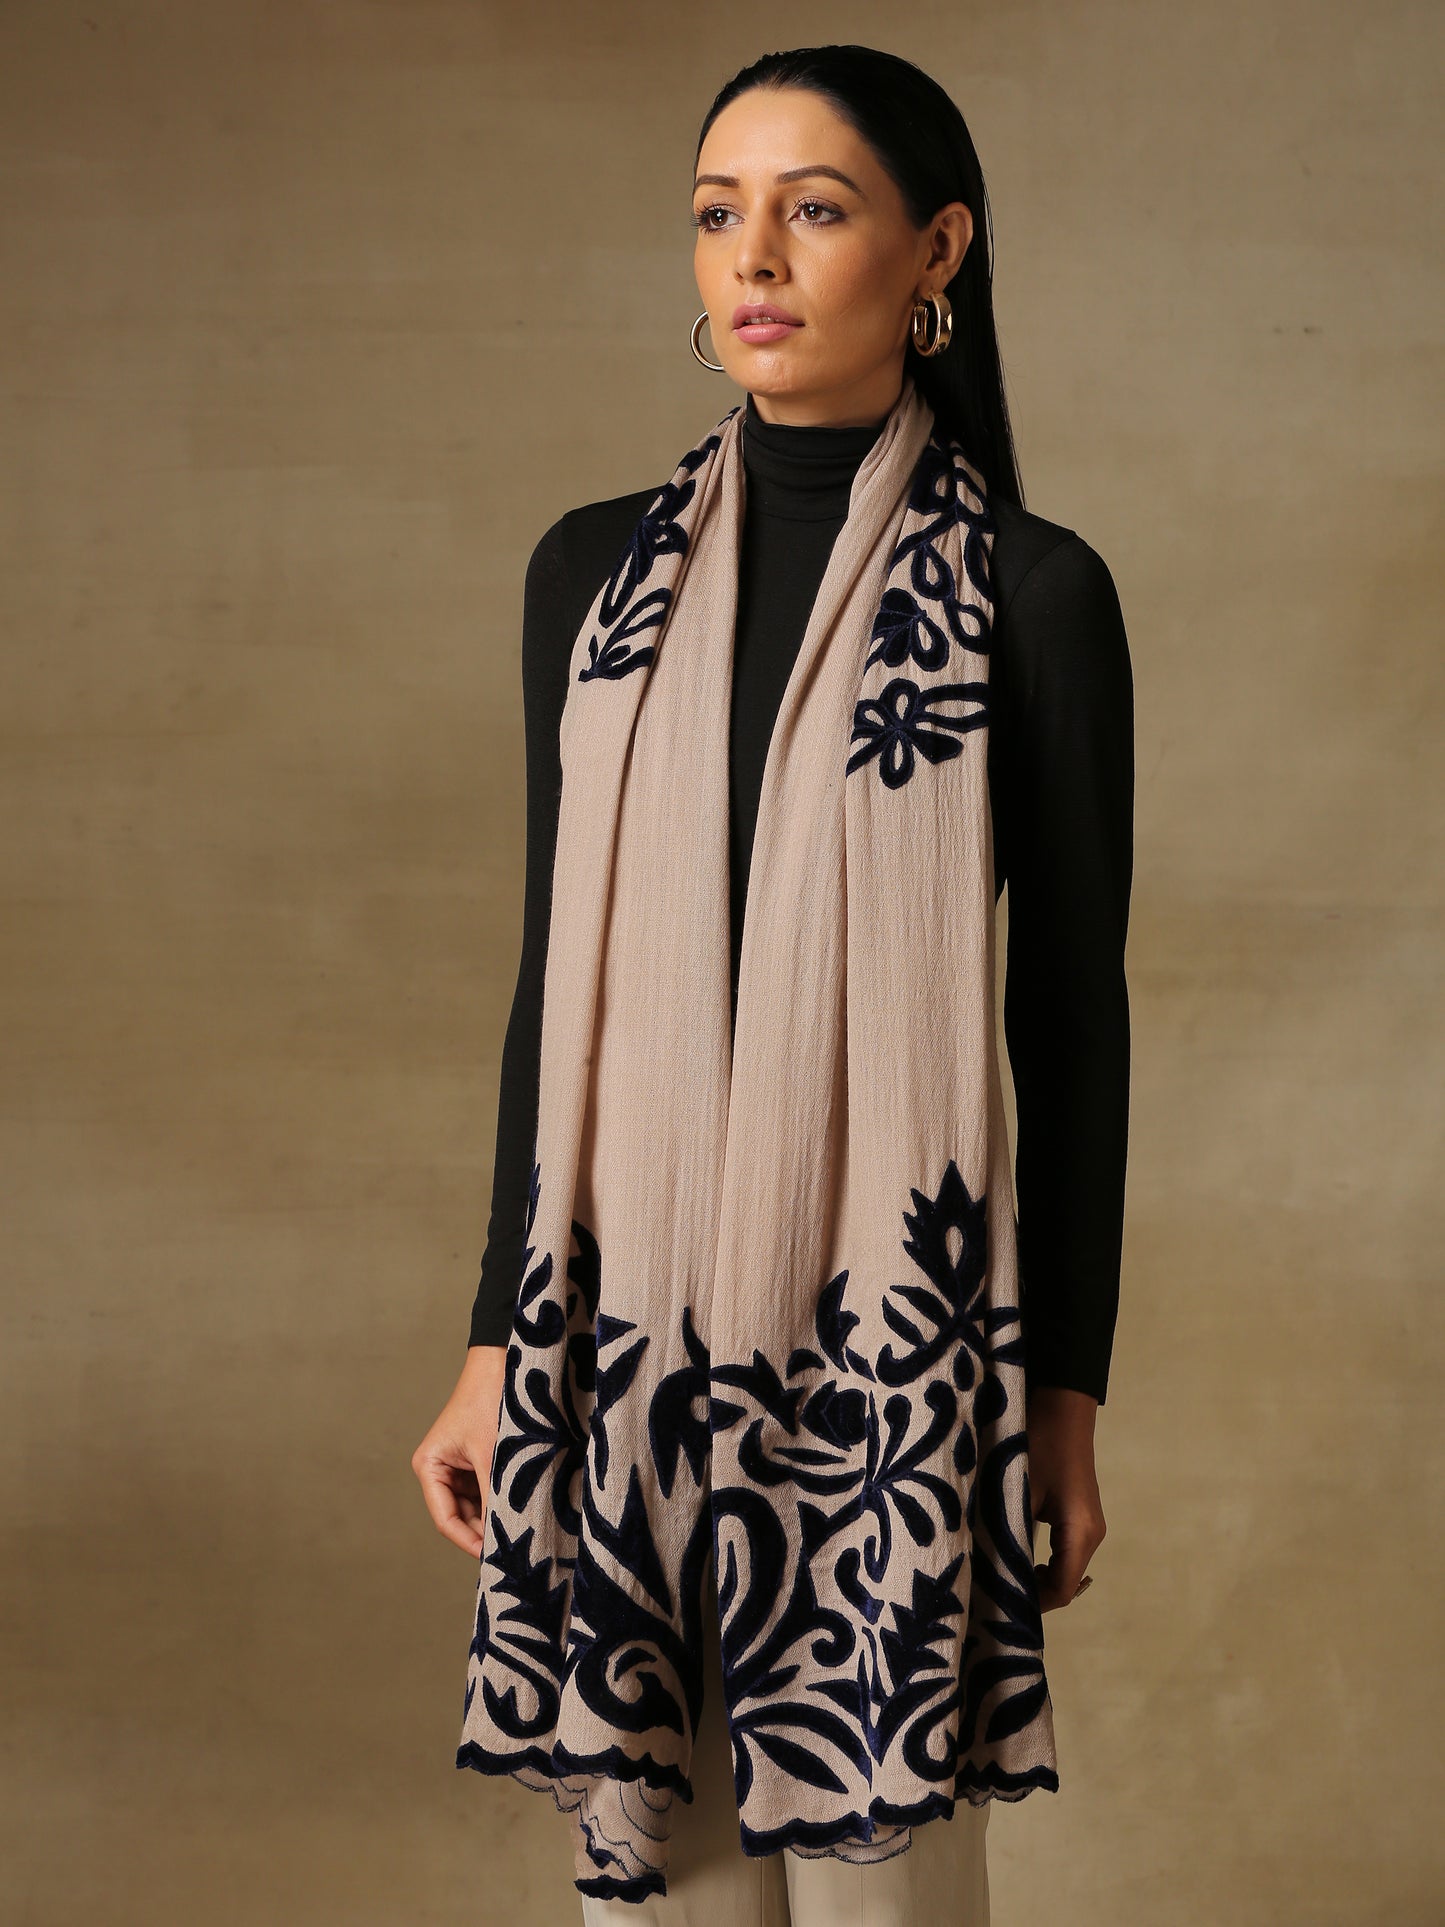 Model is wearing a Velvet Affair stole from Shaza featuring dark blue velvet applique on a light toosh coloured cashmere stole. 